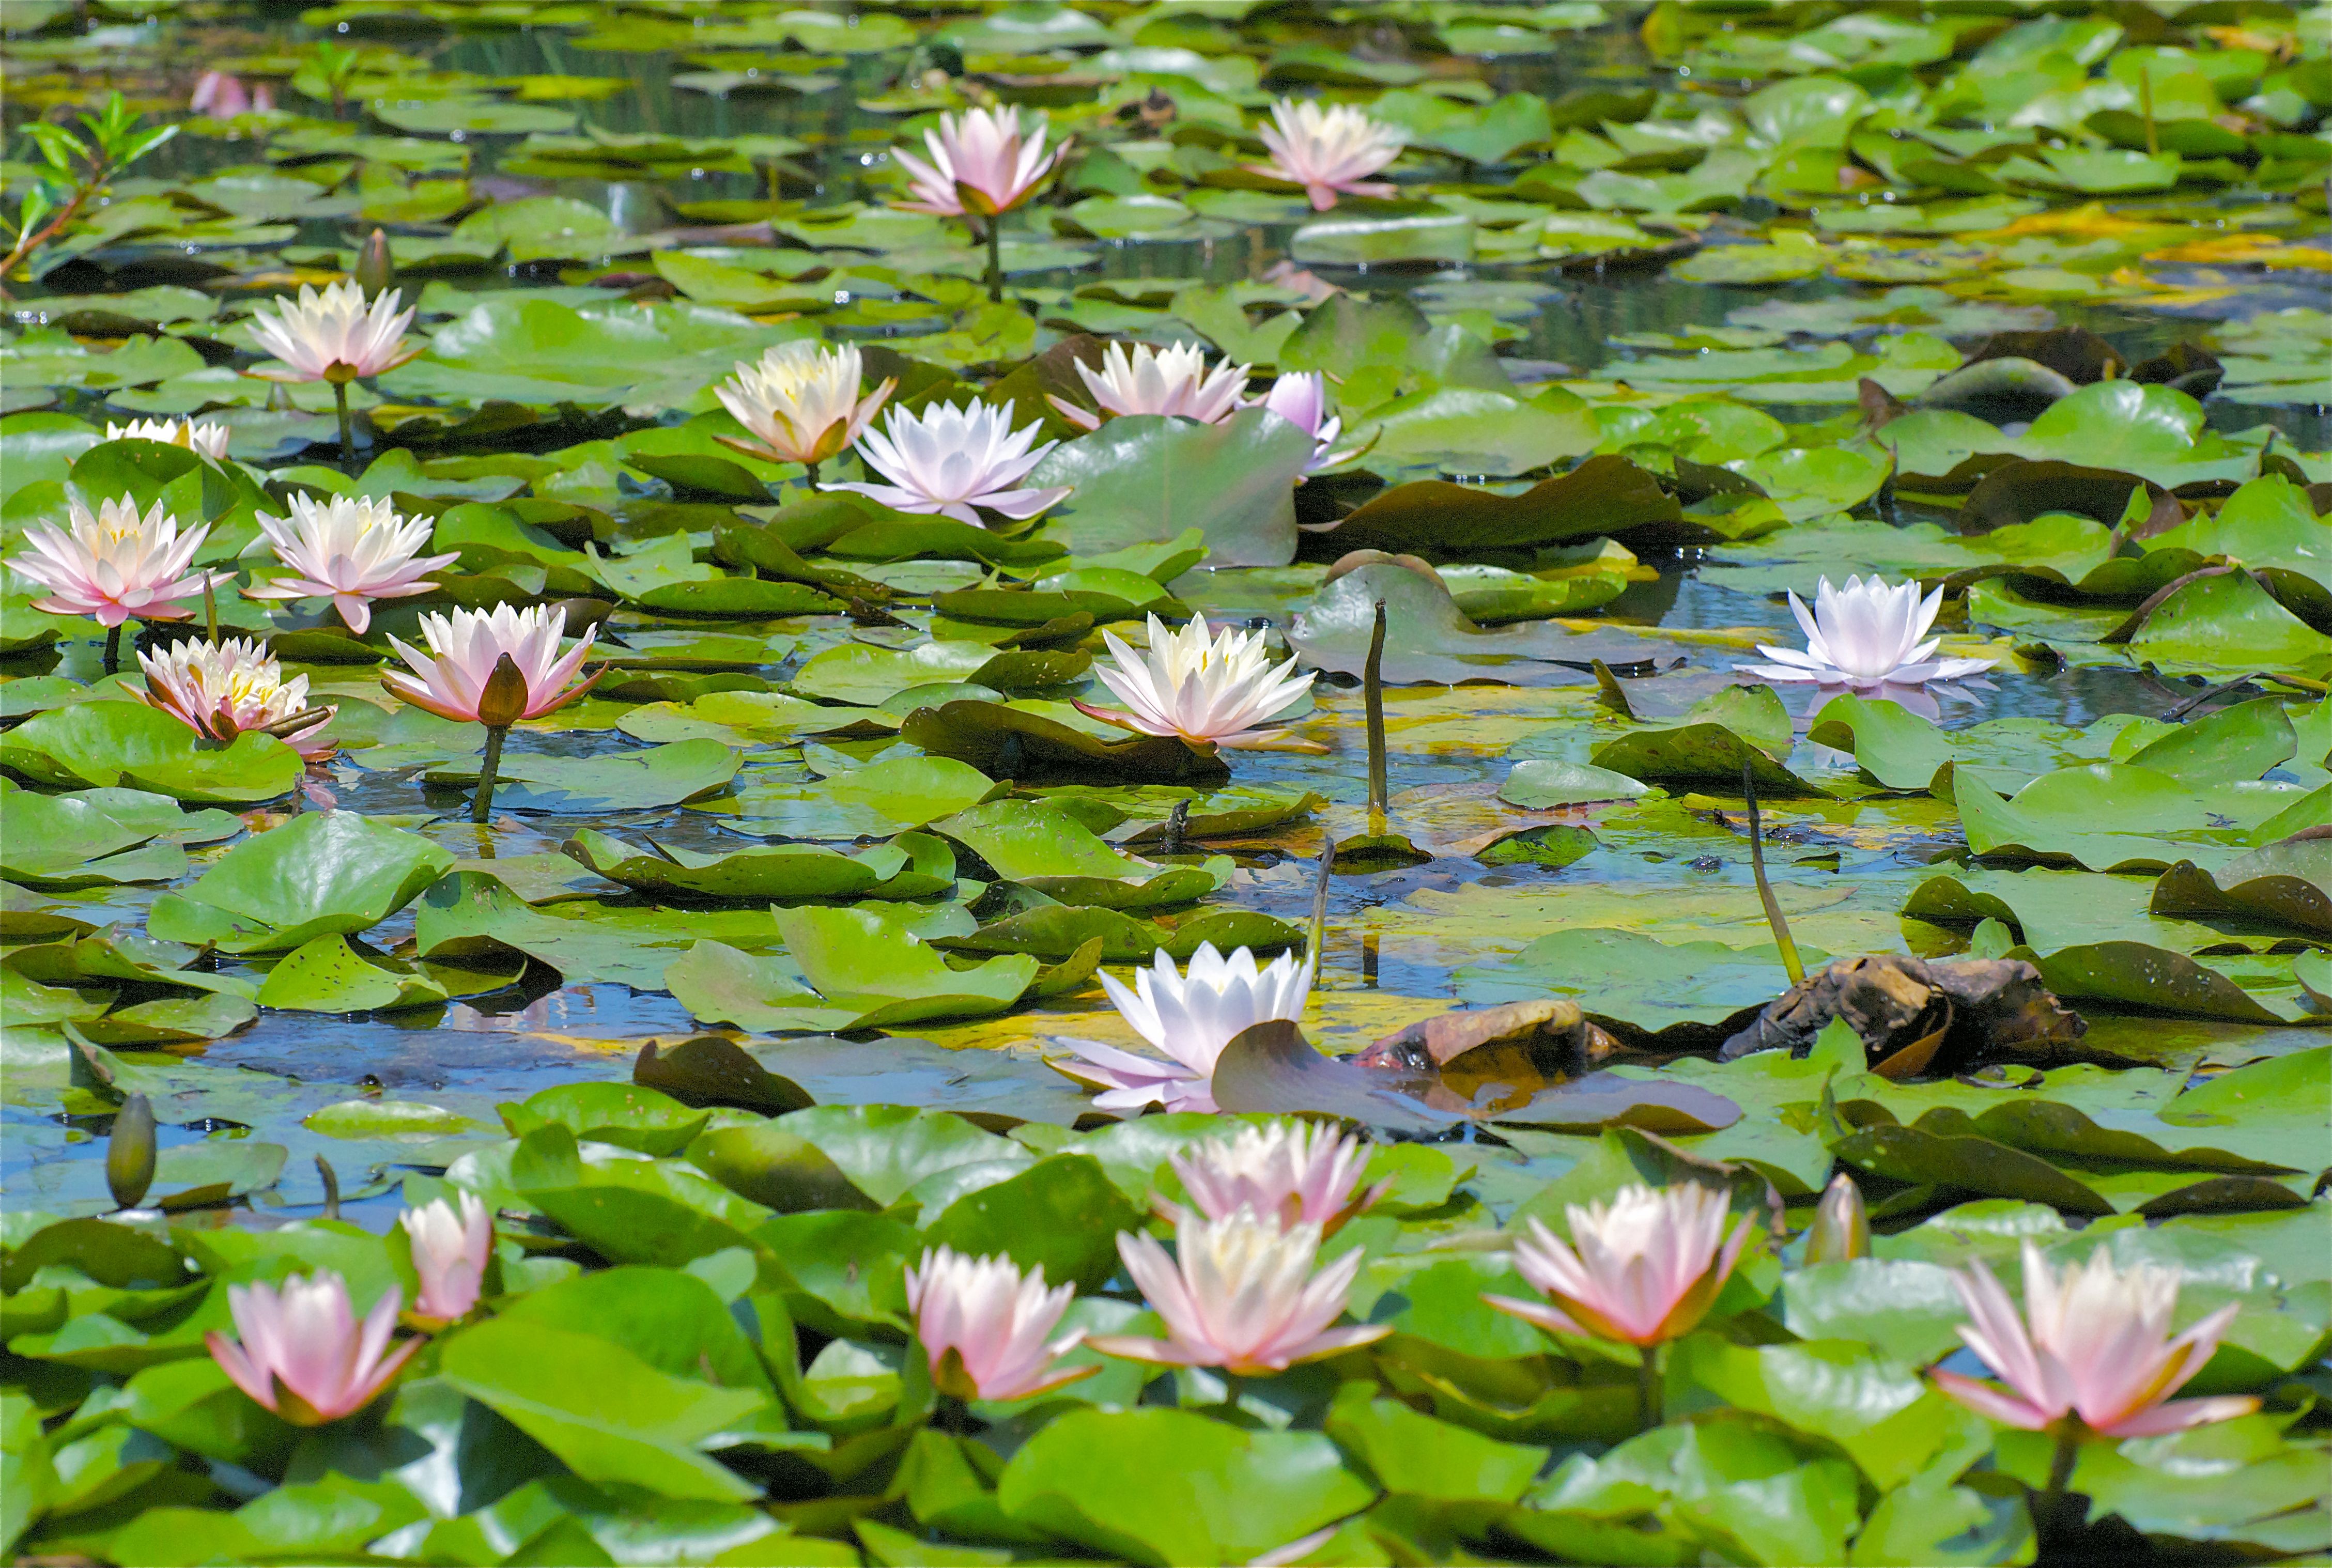 lilies on pond | Lily Pond | Water lilies | Pinterest | Pond, Water ...